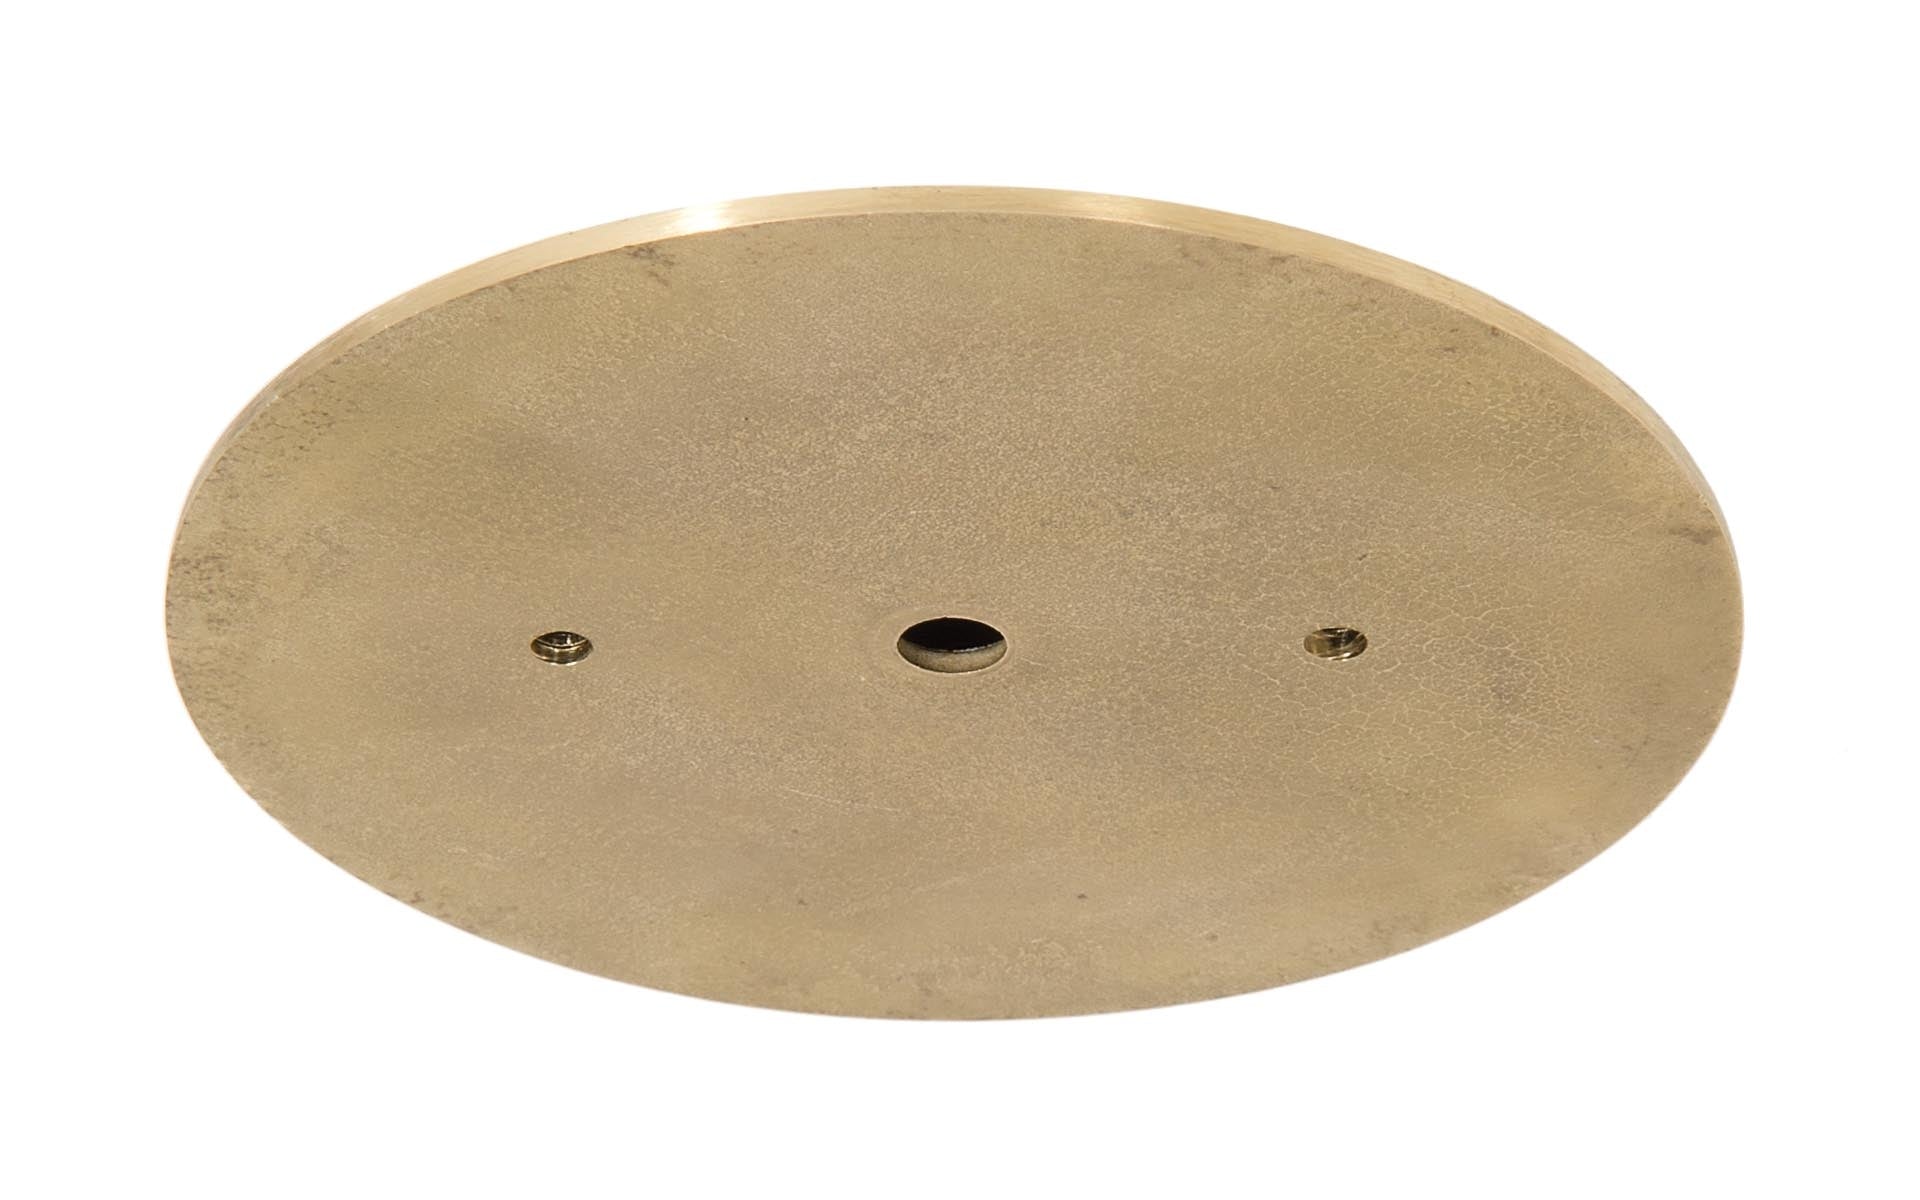 Flat Disk Style Versatile Die Cast Brass Ceiling Canopy with Mounting Hardware, Choice of Diameter